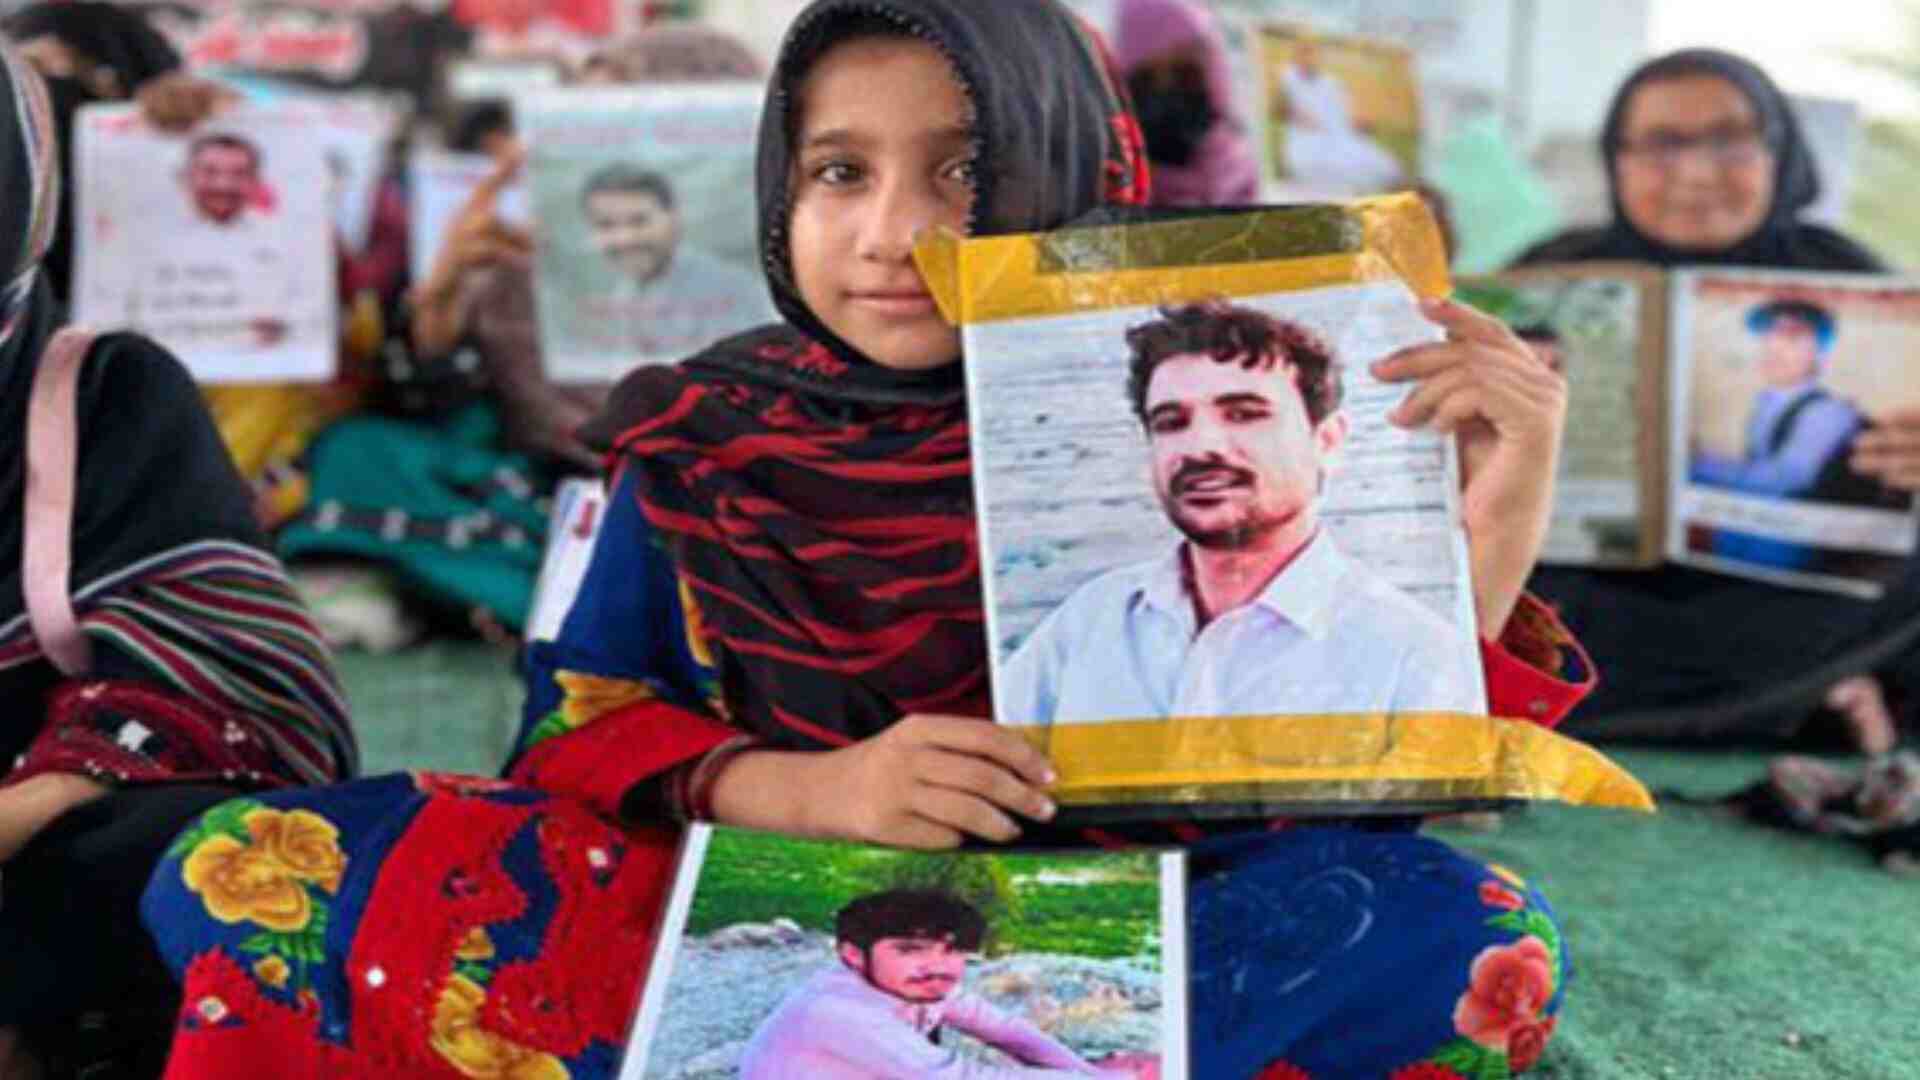 Pakistan: 19 People Face Enforced Disappearance Within 2 Weeks, Prior To July 28 Baloch Protests